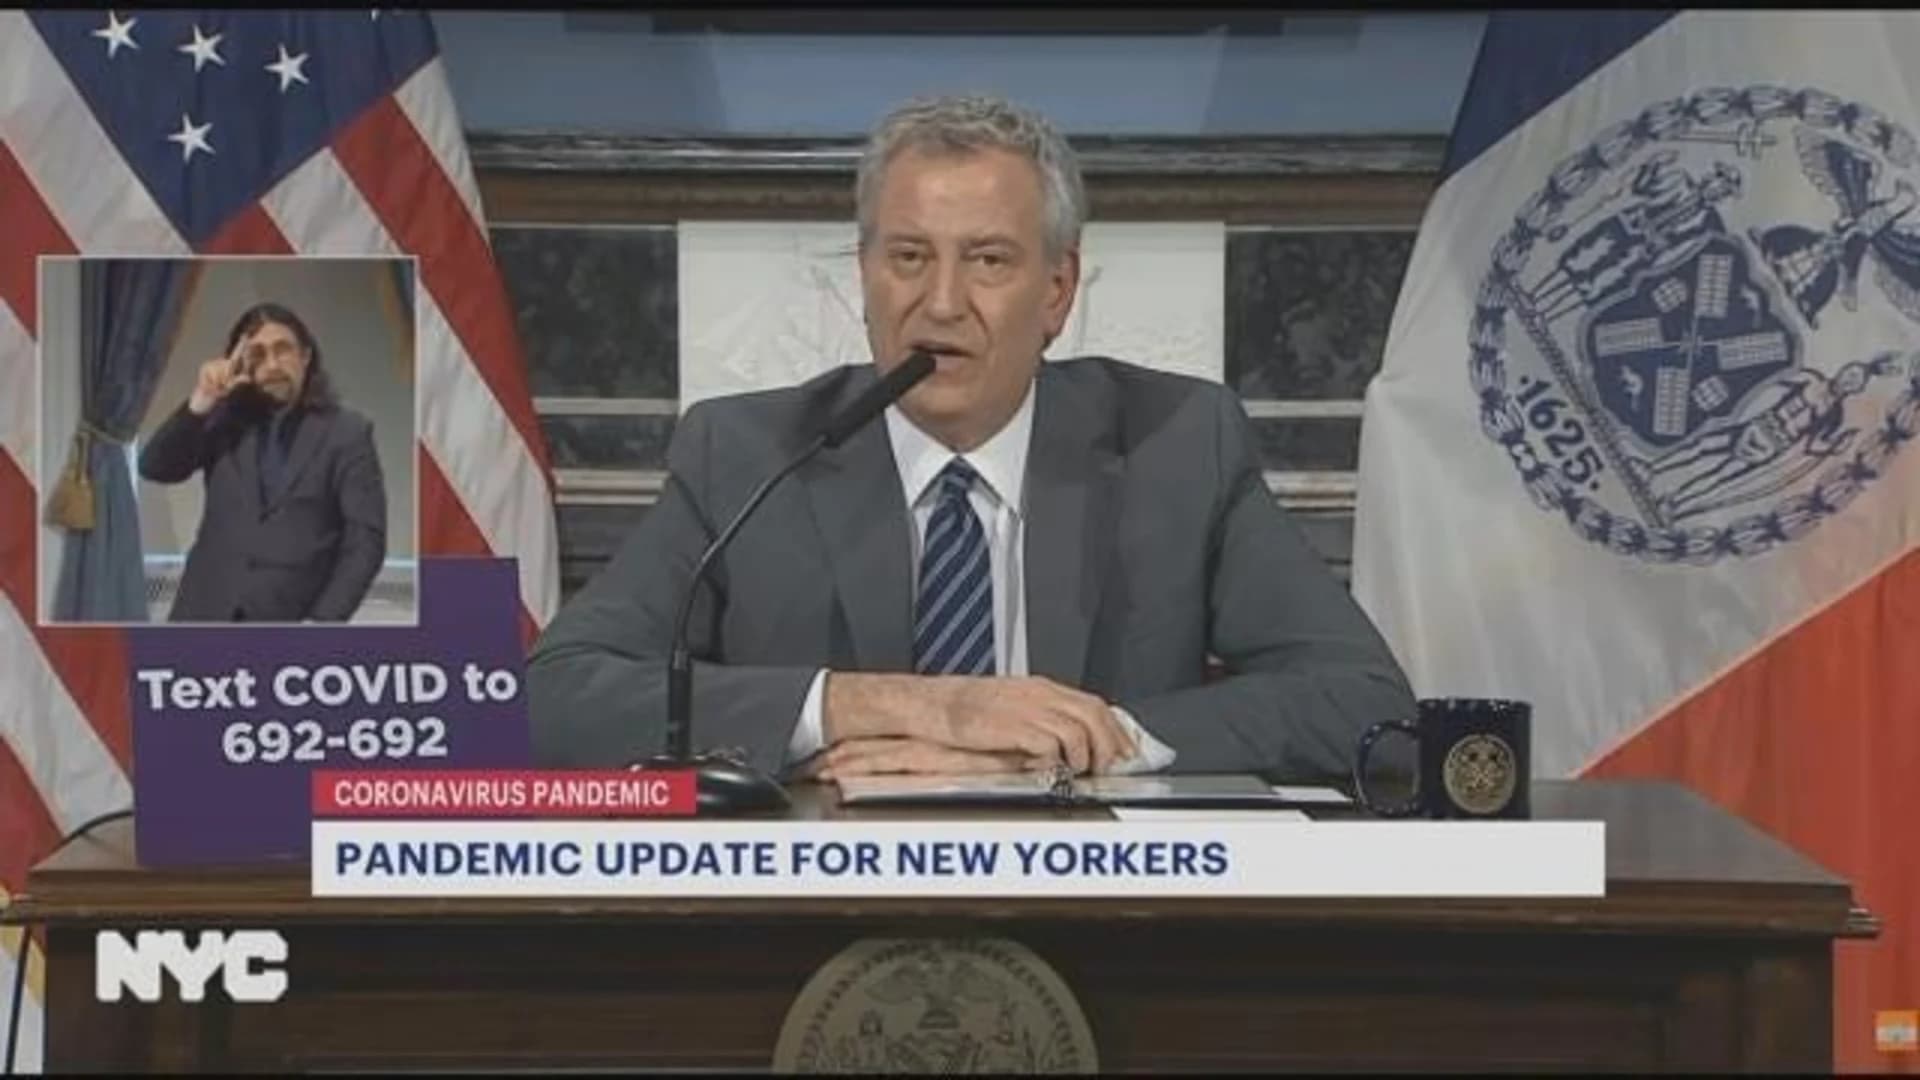 'A long, tough fight.' Mayor promises more health care gear as NYC death toll reaches 365